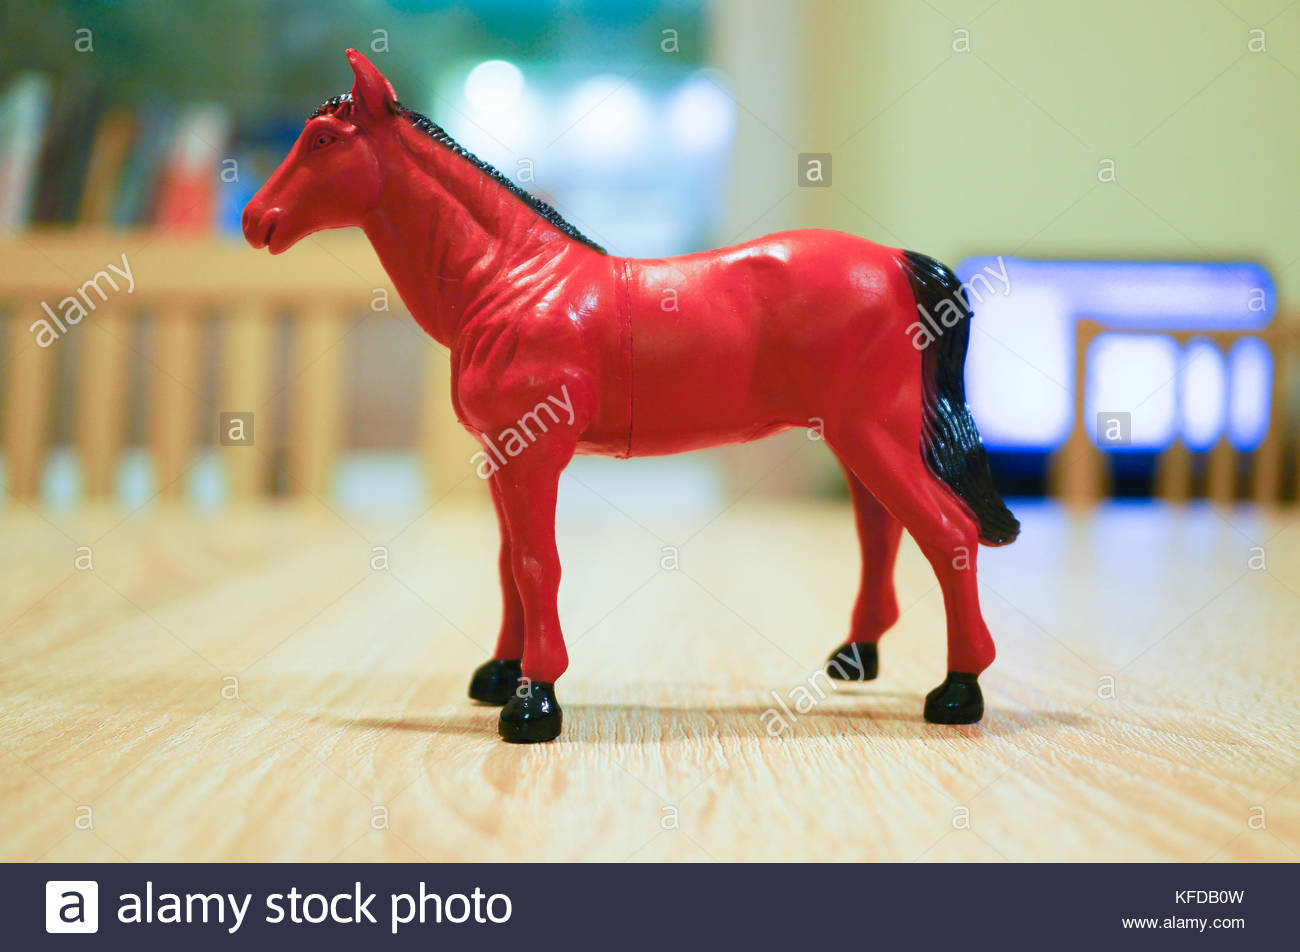 toy horse figures